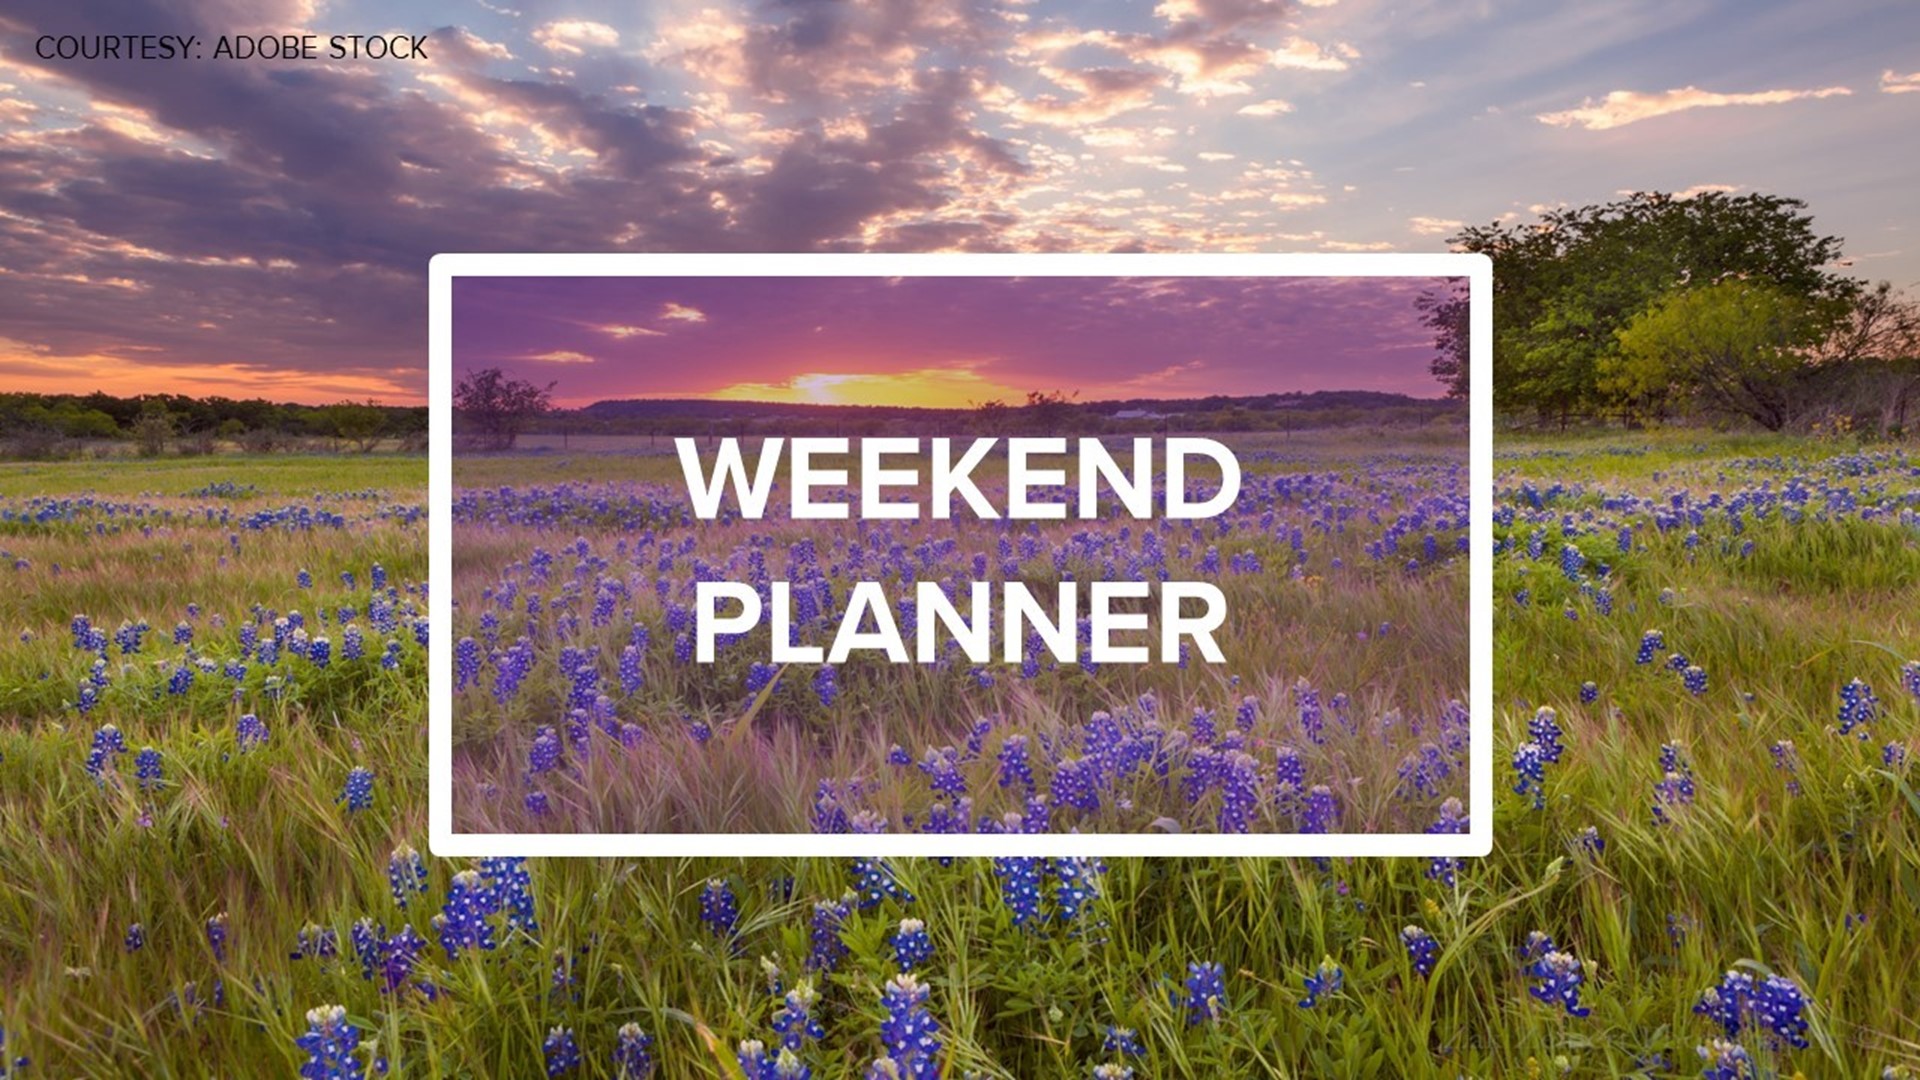 East Texas is packed with fun events this Memorial weekend.